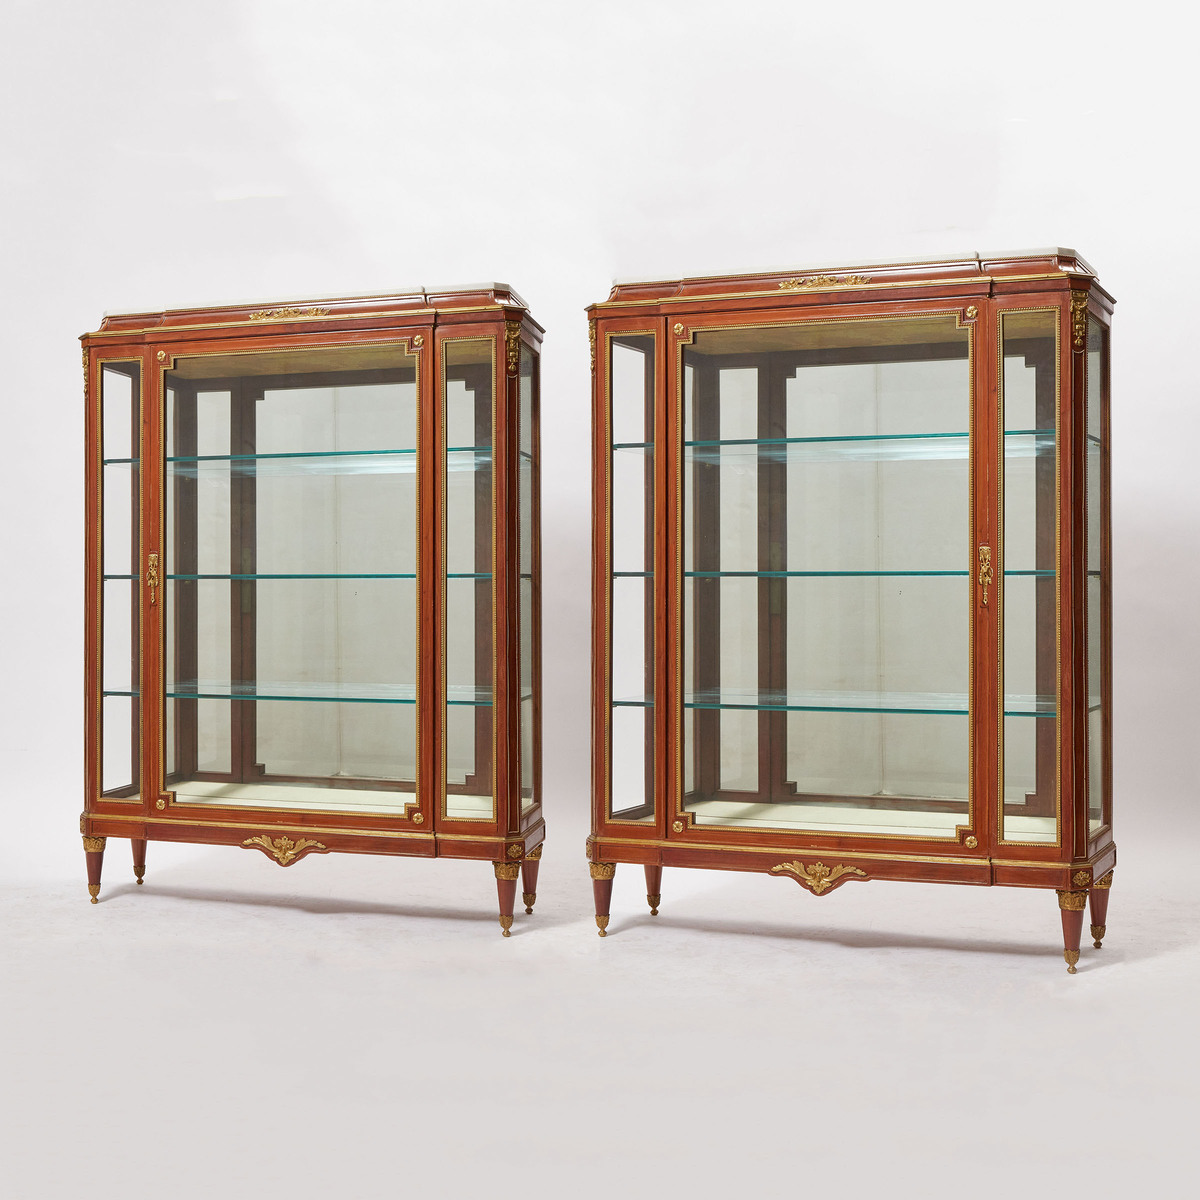 Pair of French Louis XVI Style Ormolu Mounted Vitrine Cabinets, c.1900